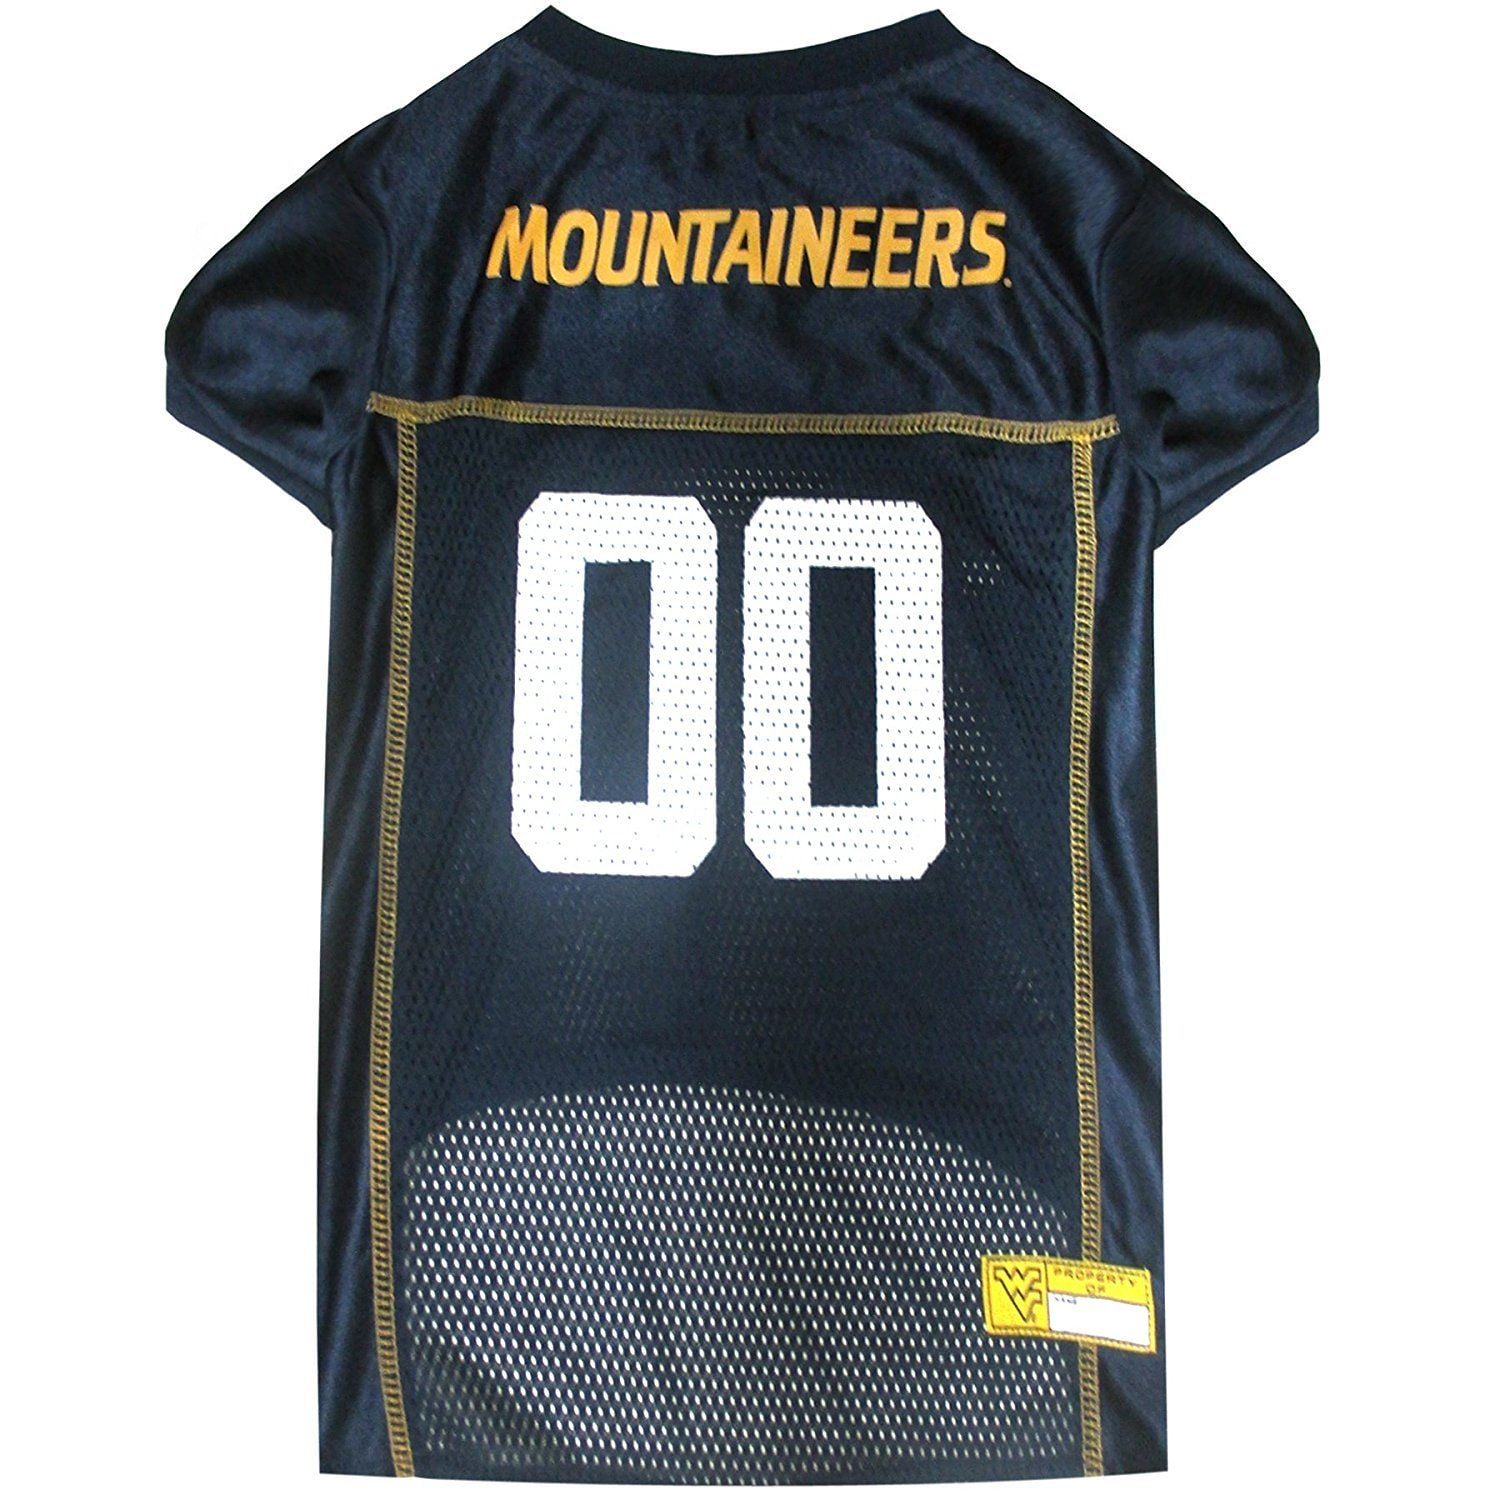 Football Jerseys for Dogs & Cats Available in 50 Pets First NCAA PET Apparels Collegiate Teams & 7 Sizes Basketball Jerseys 